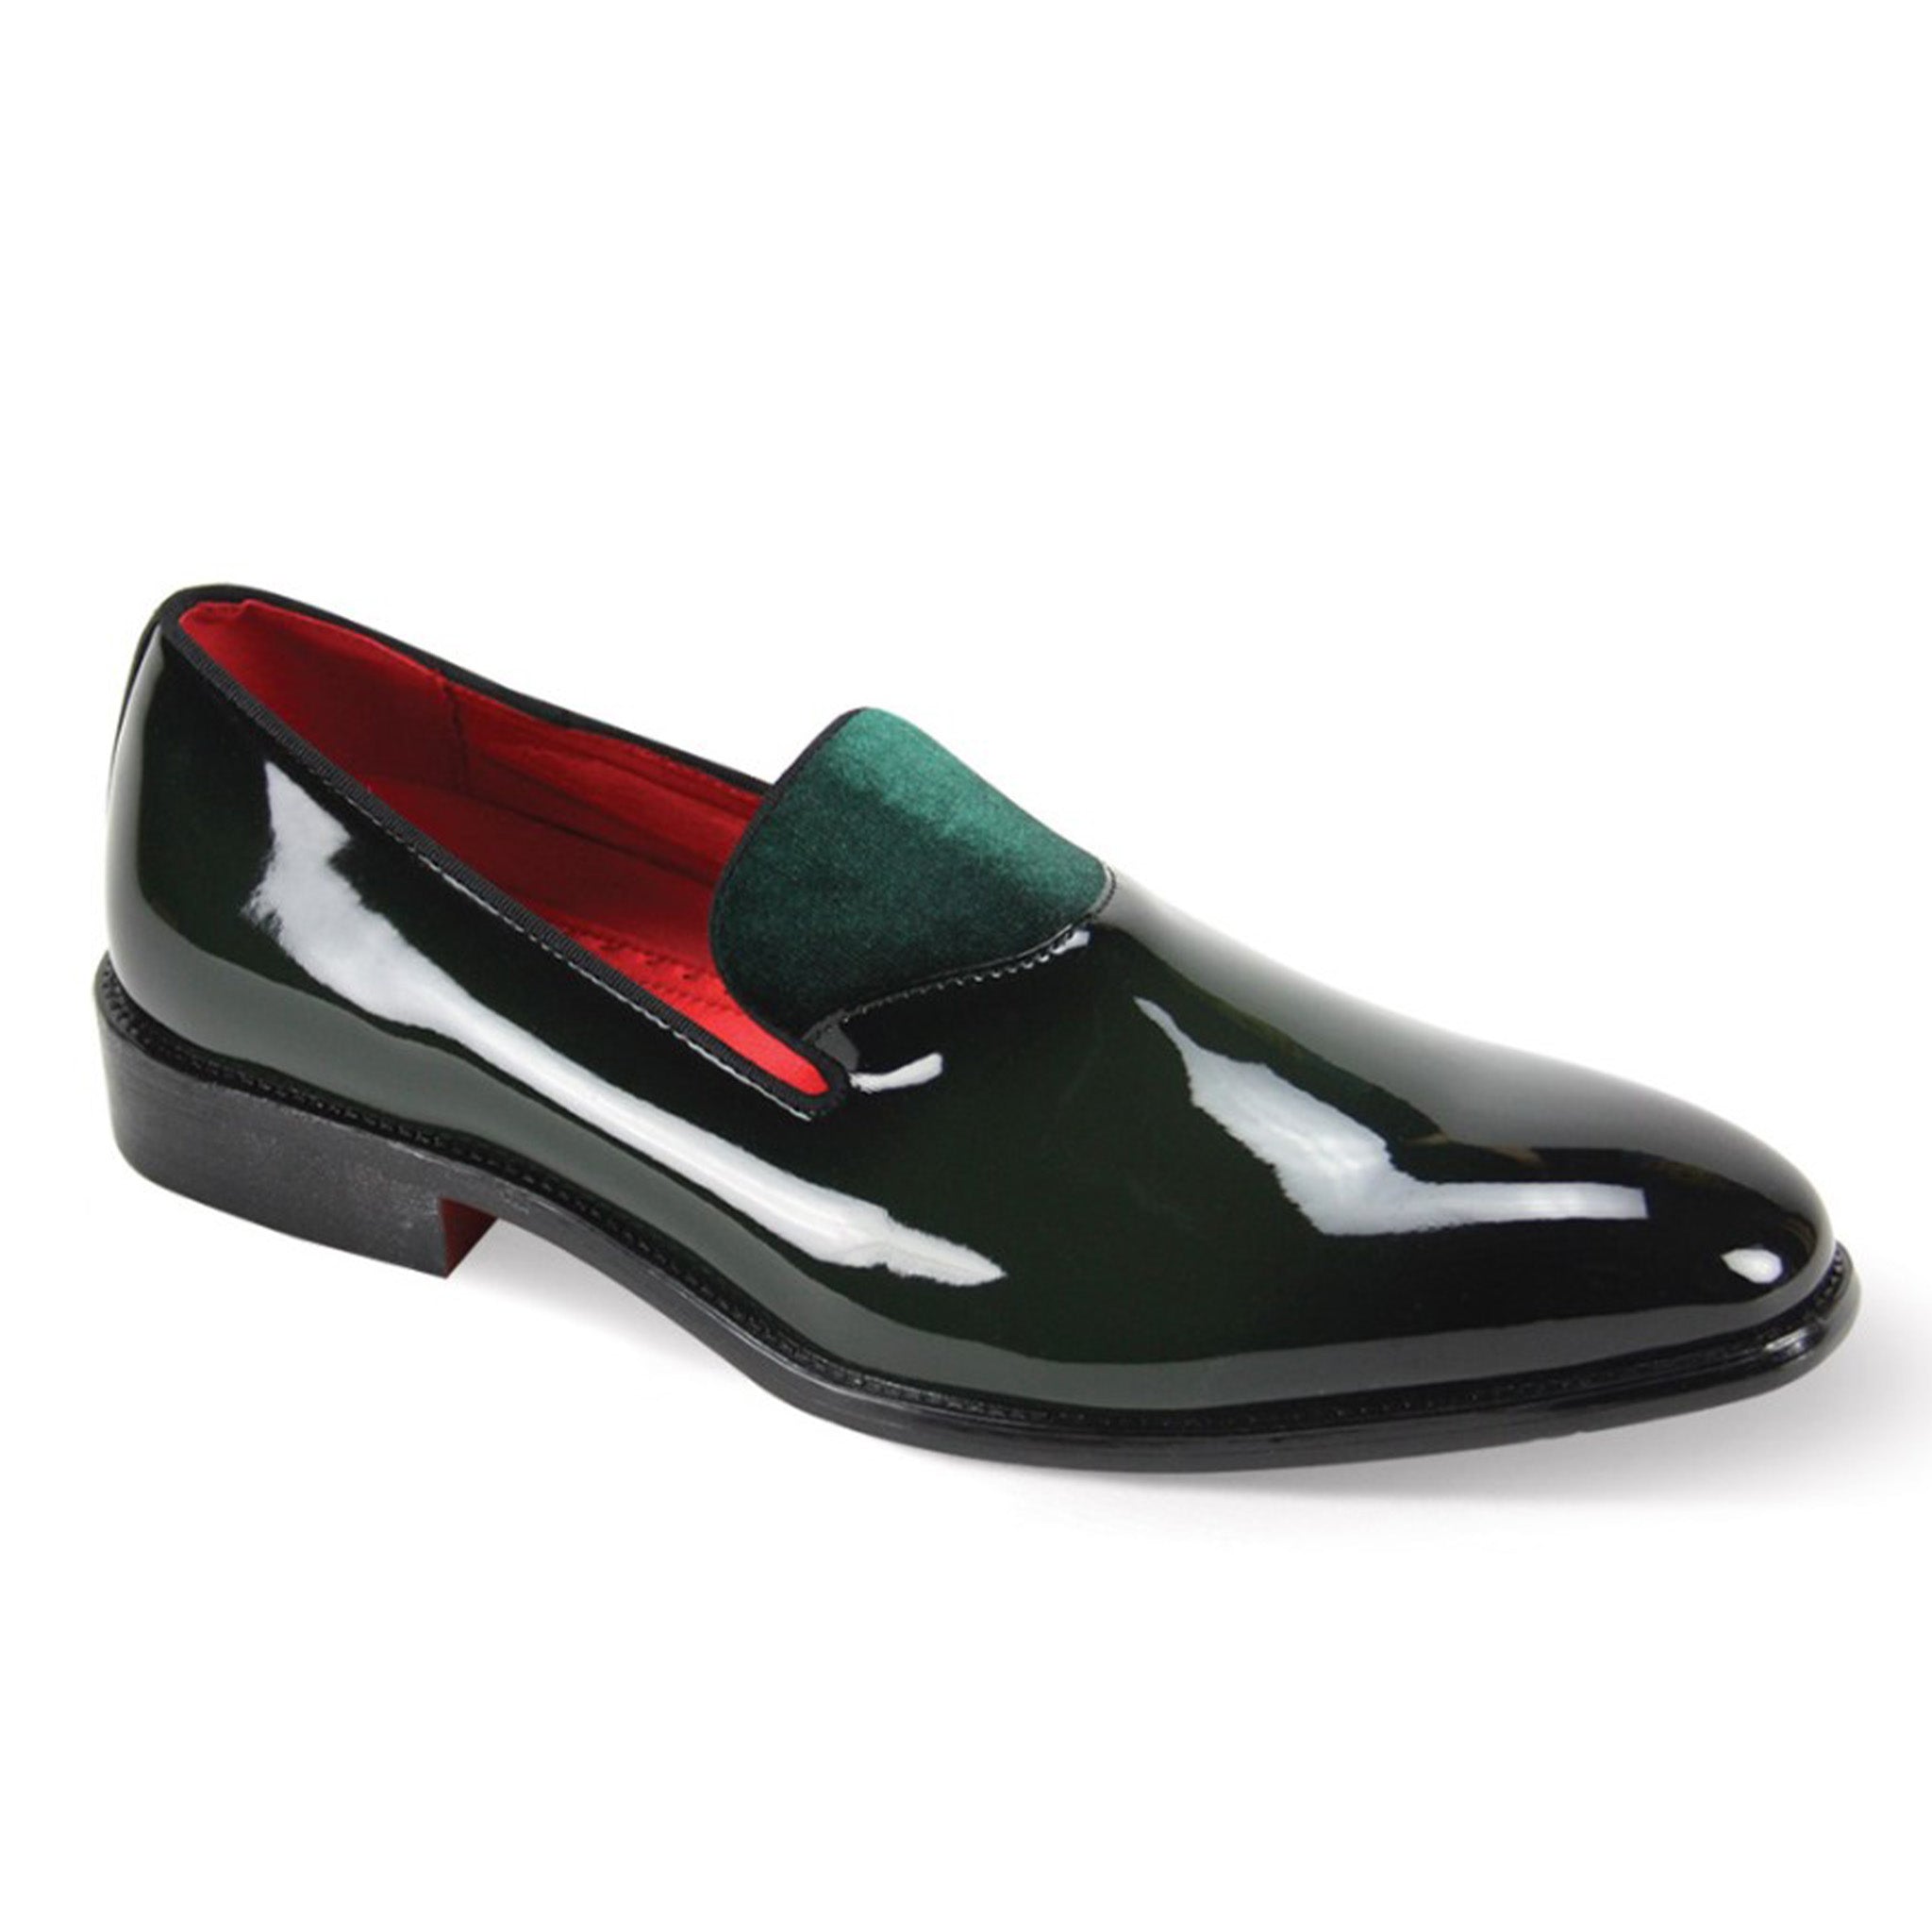 H. Green Patent Fashion Loafer